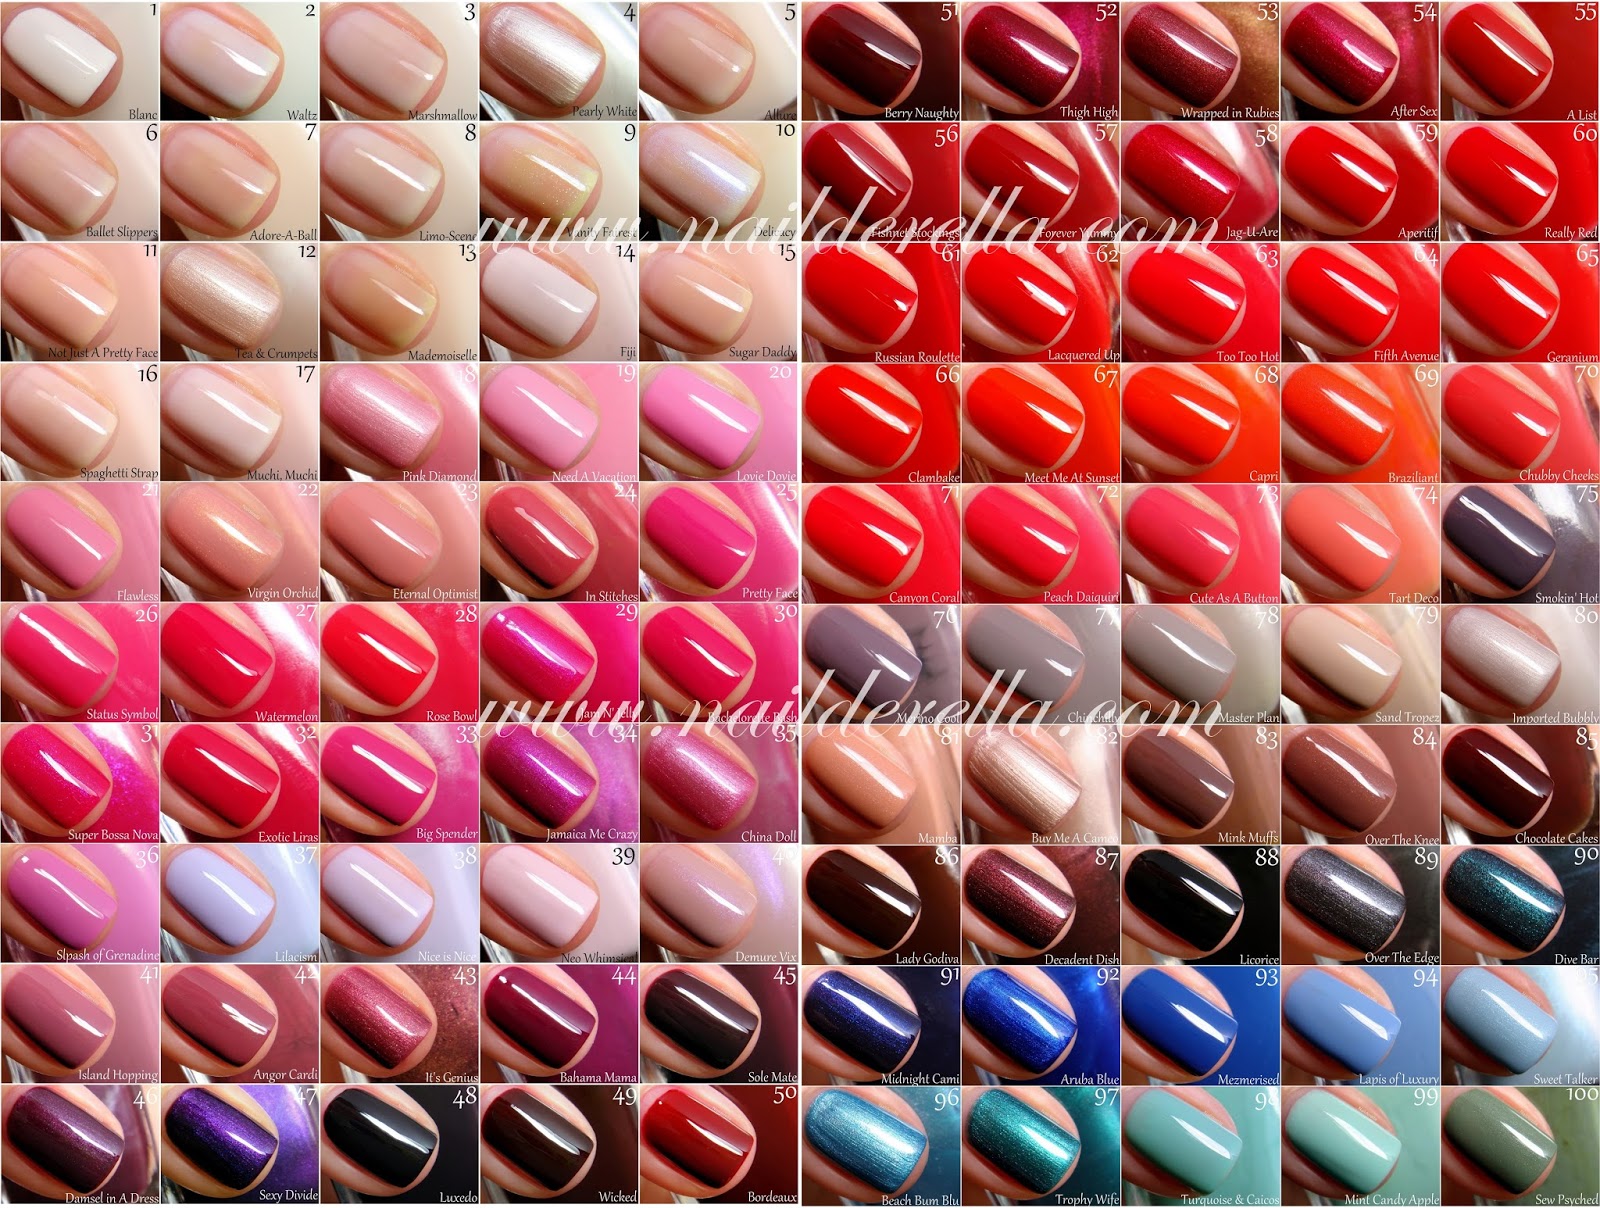 1. Sinful Colors Sheer Lust Nail Polish Color Chart - wide 11